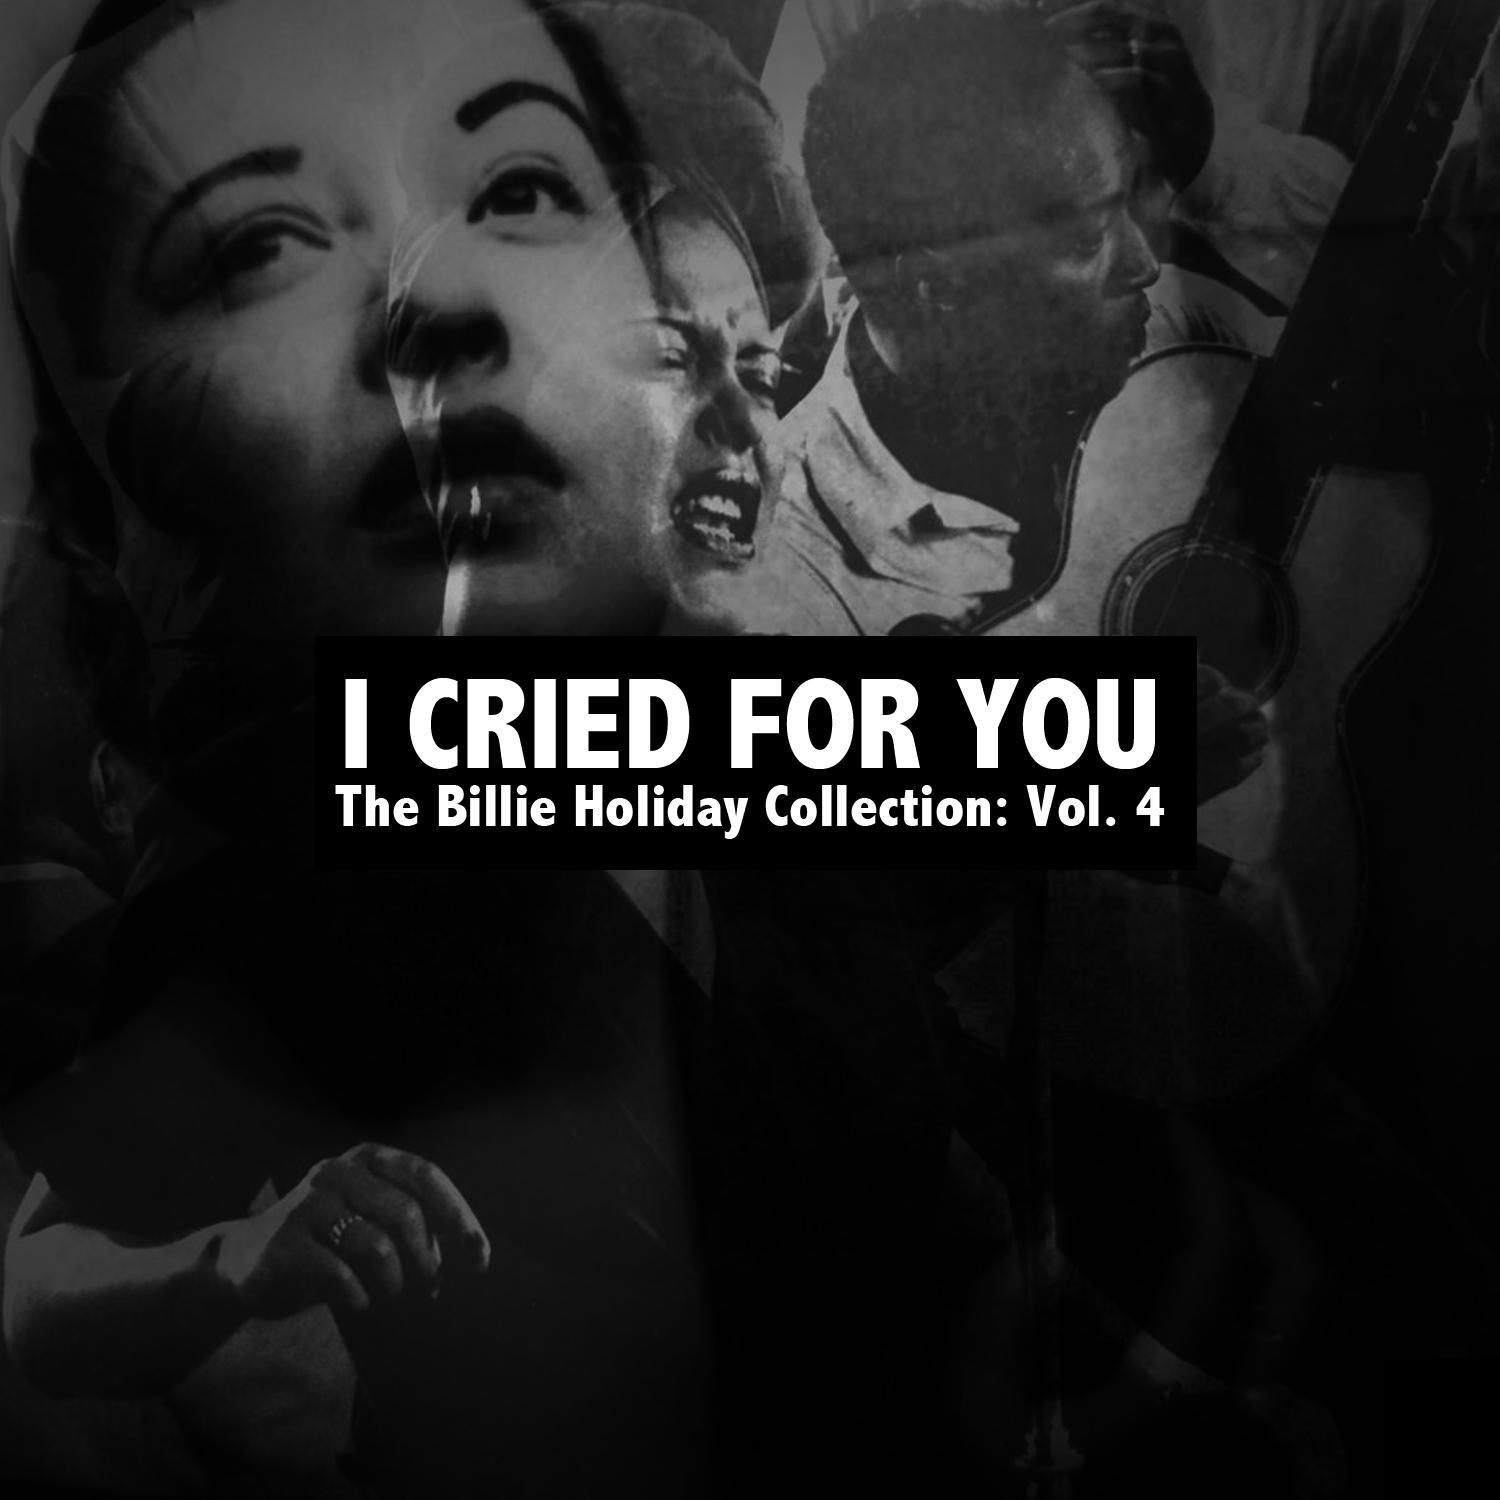 I Cried for You: The Billie Holiday Collection, Vol. 4